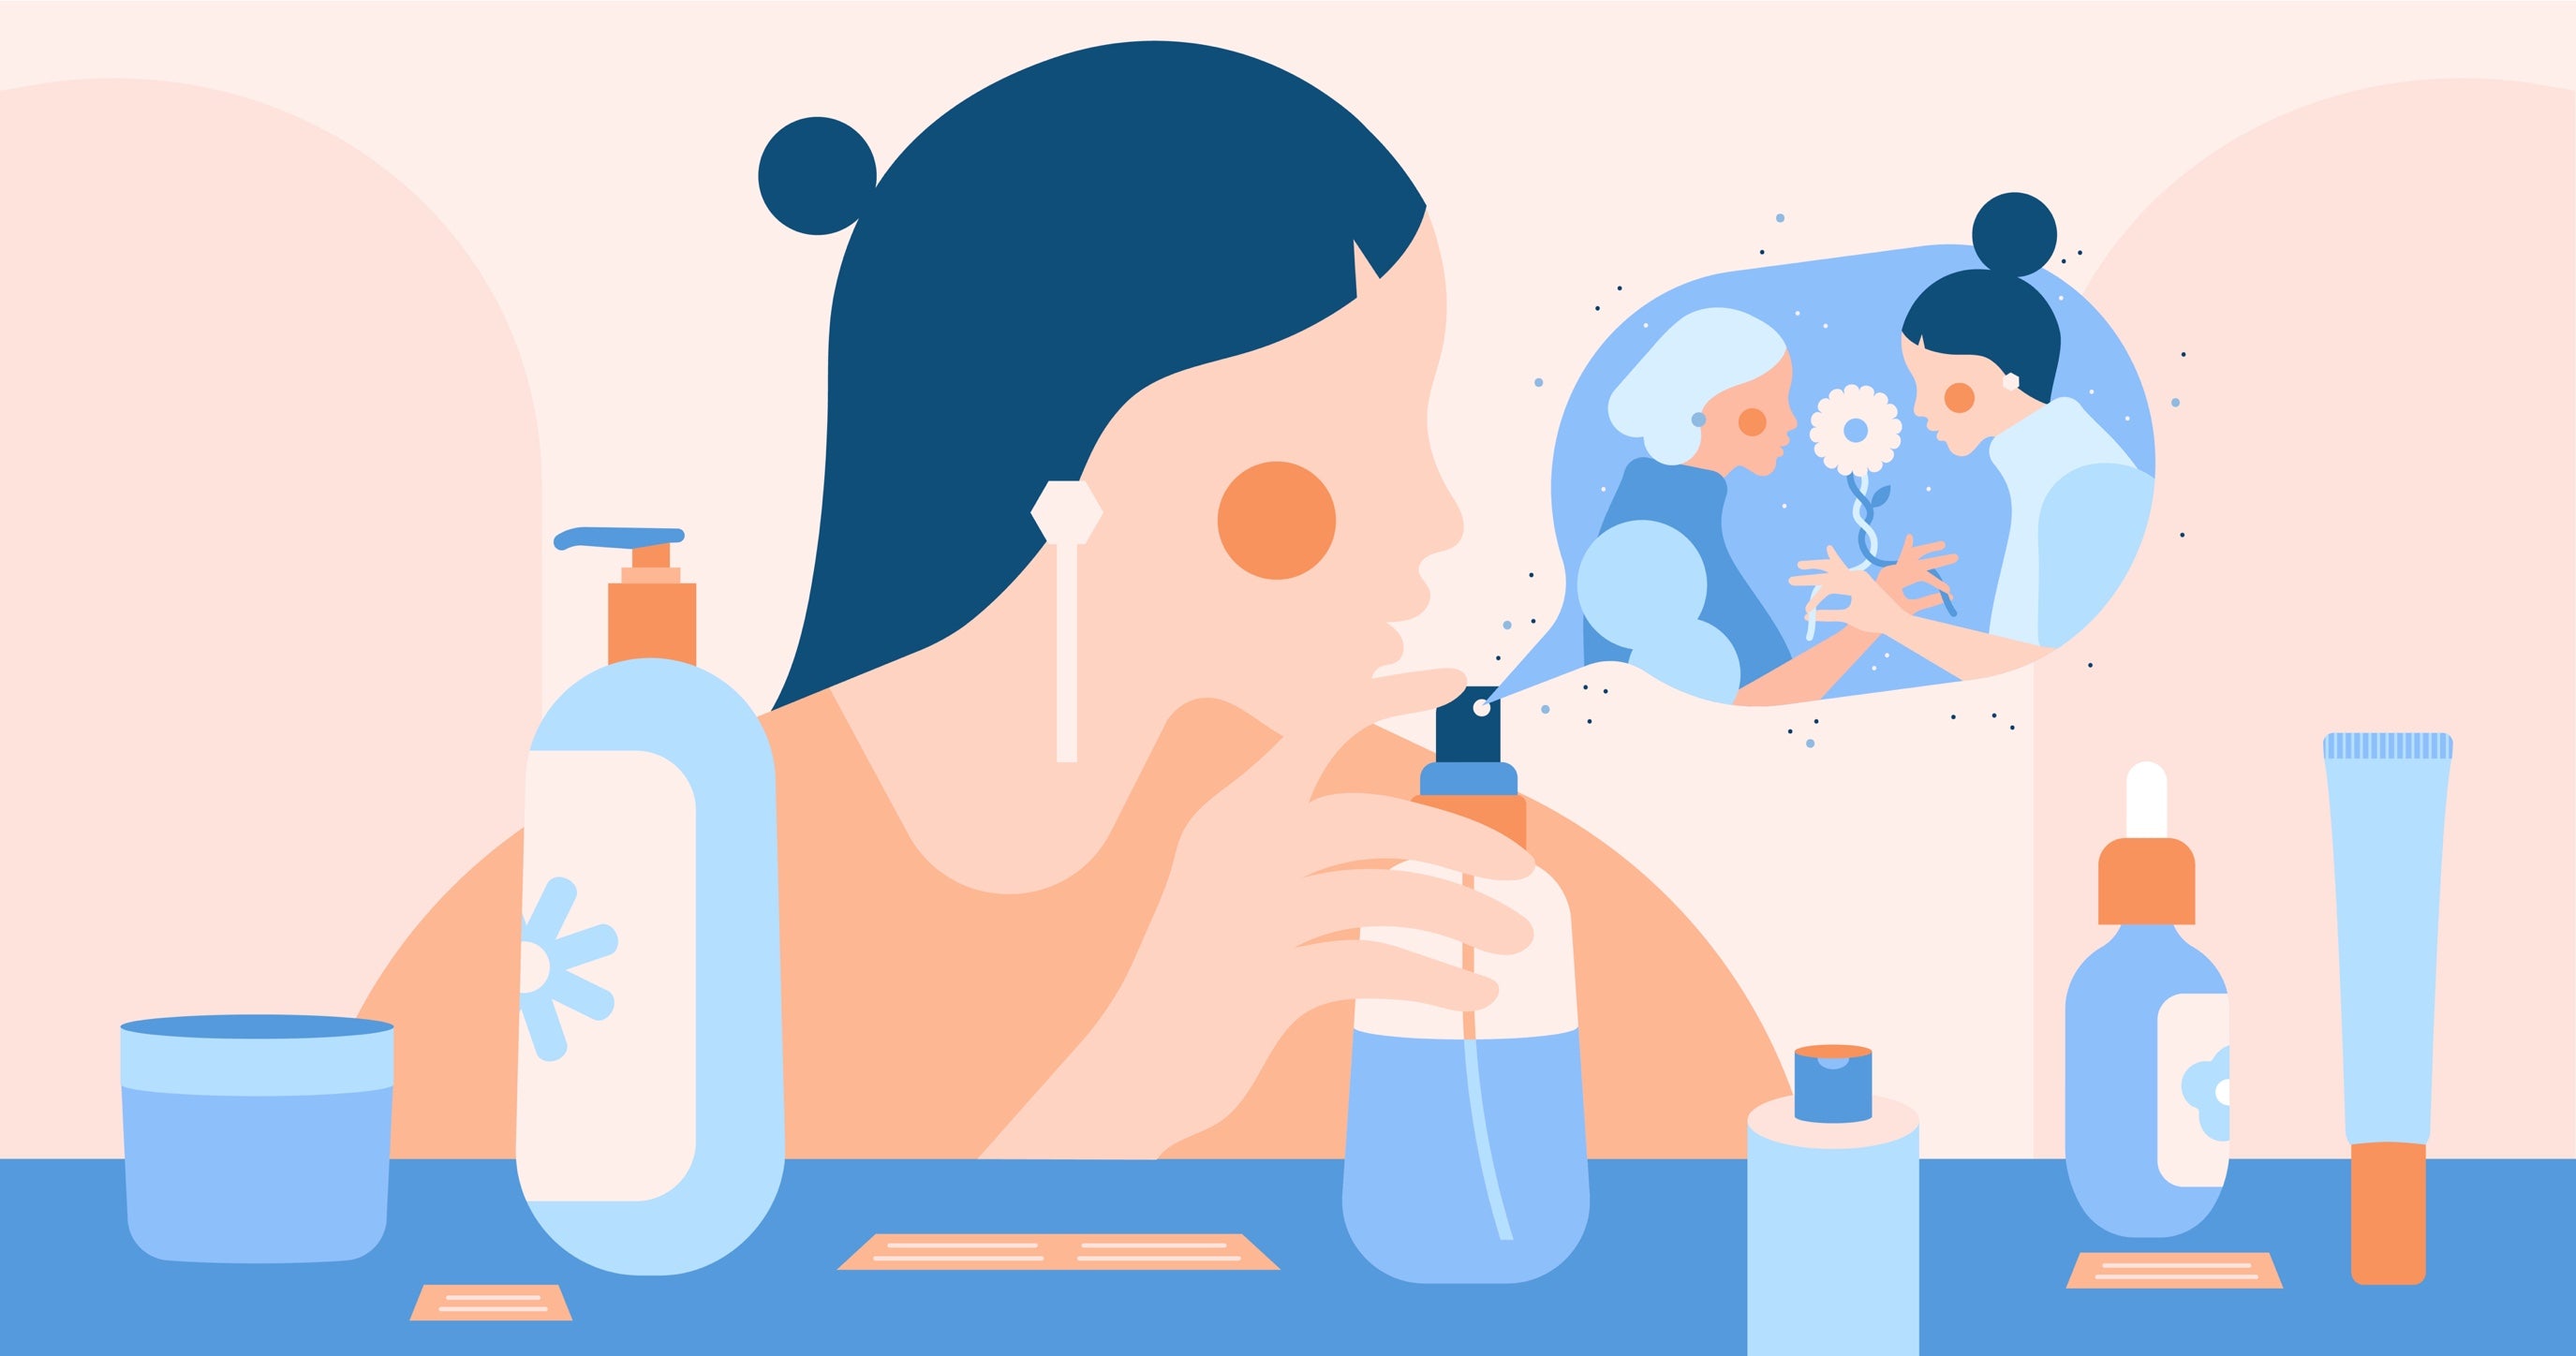 illustration of a woman trying skincare products with two characters interacting inside a perfume cloud